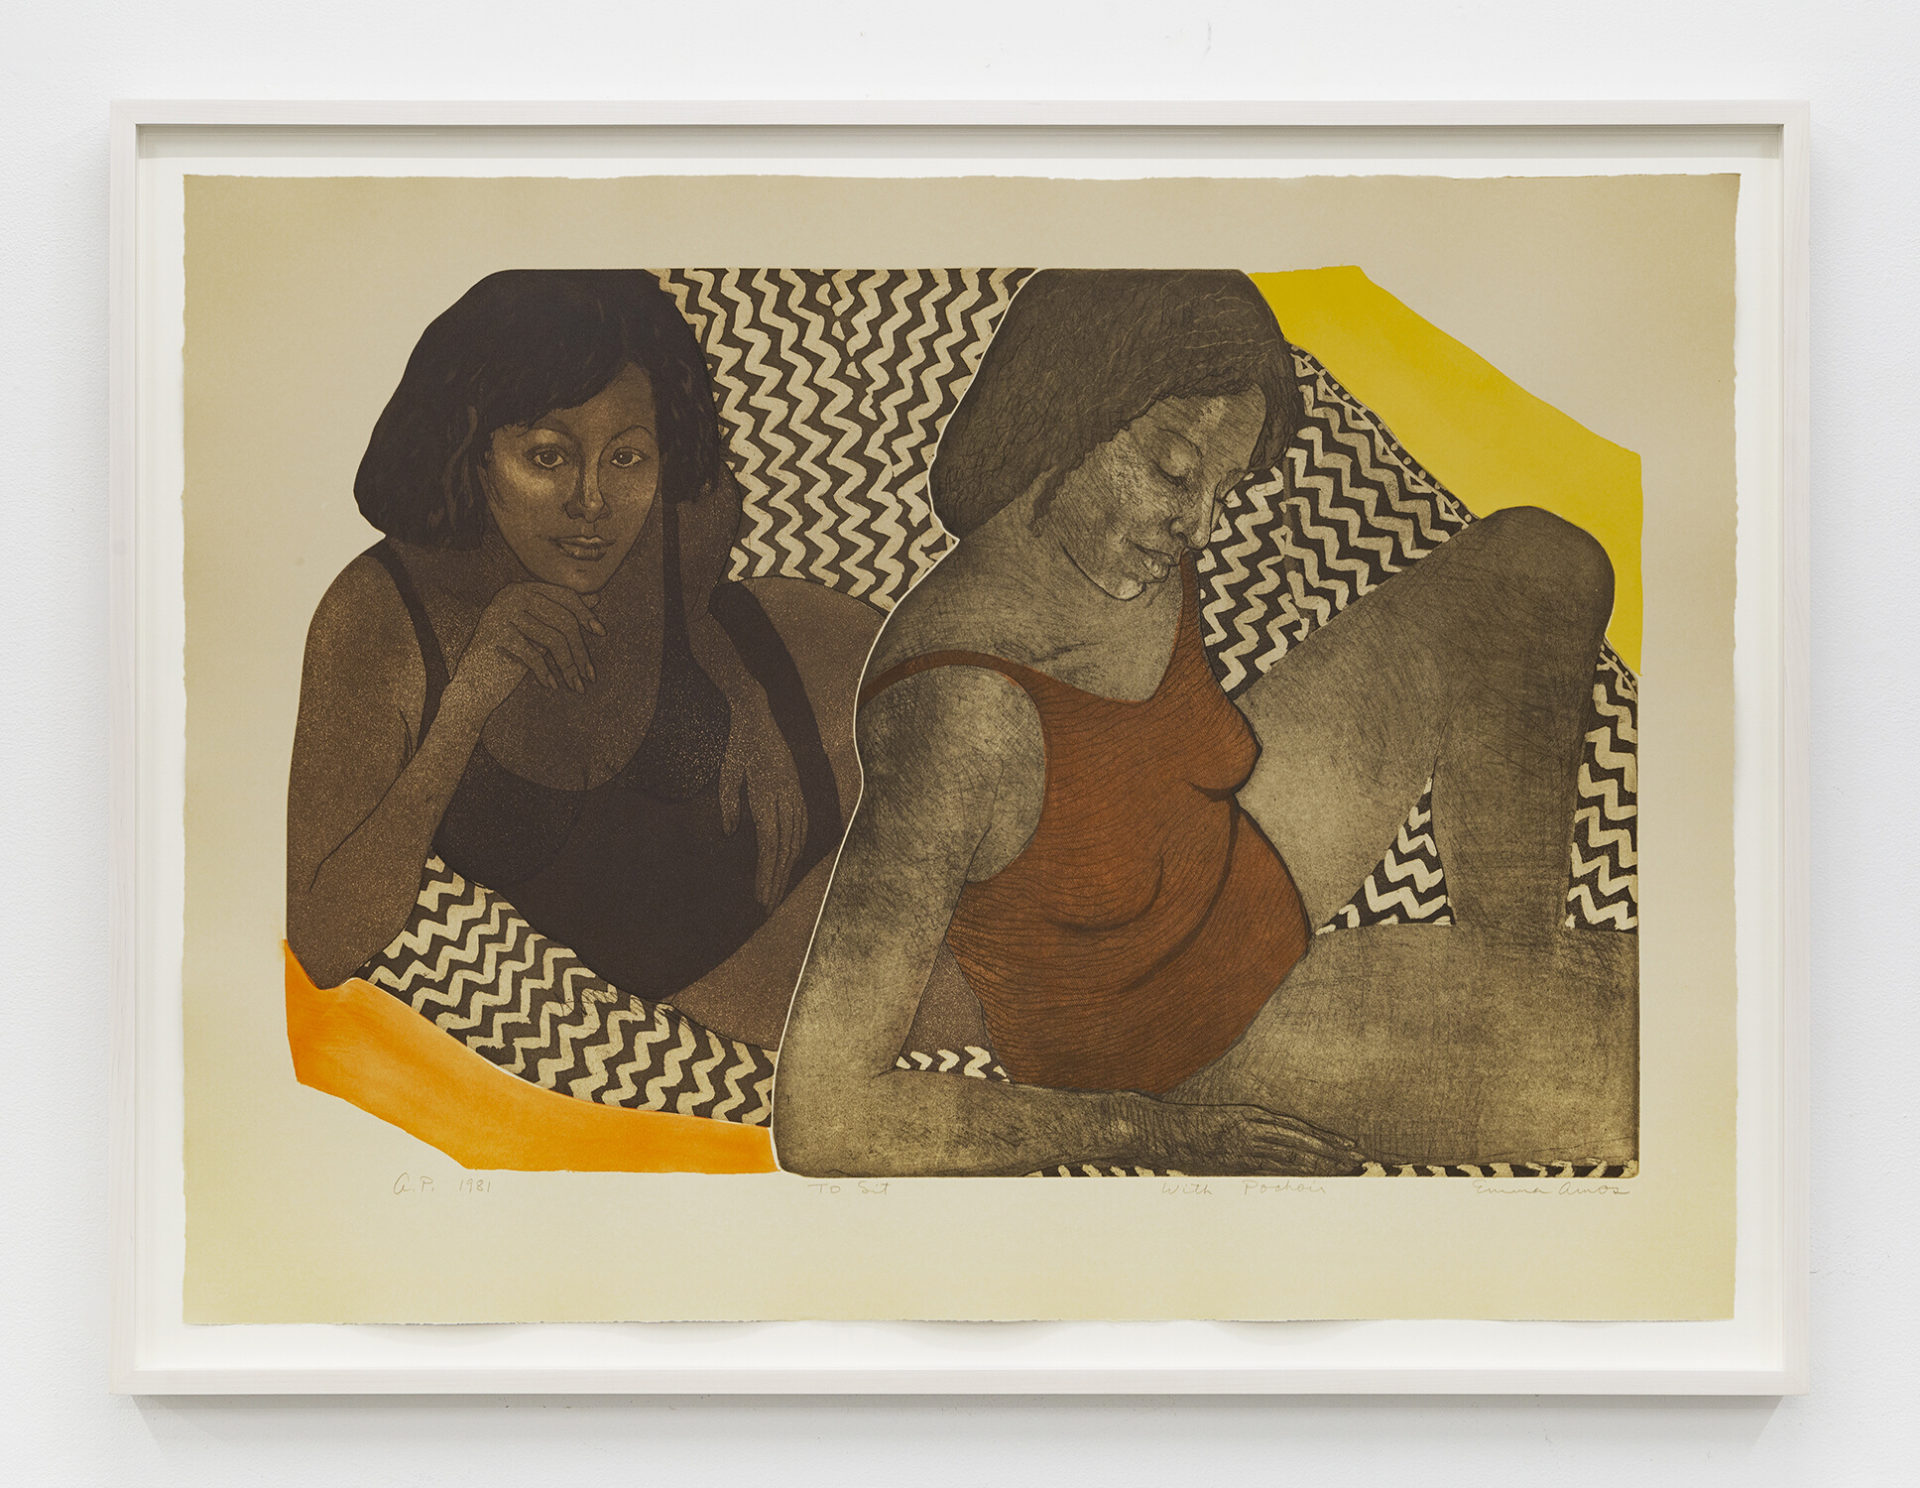 To Sit (with Pochoir), 1981, Etching, aquatint, and styrene stencil, 40 x 29 1/2 inches (101.6 x 74.9 cm), Edition of 25